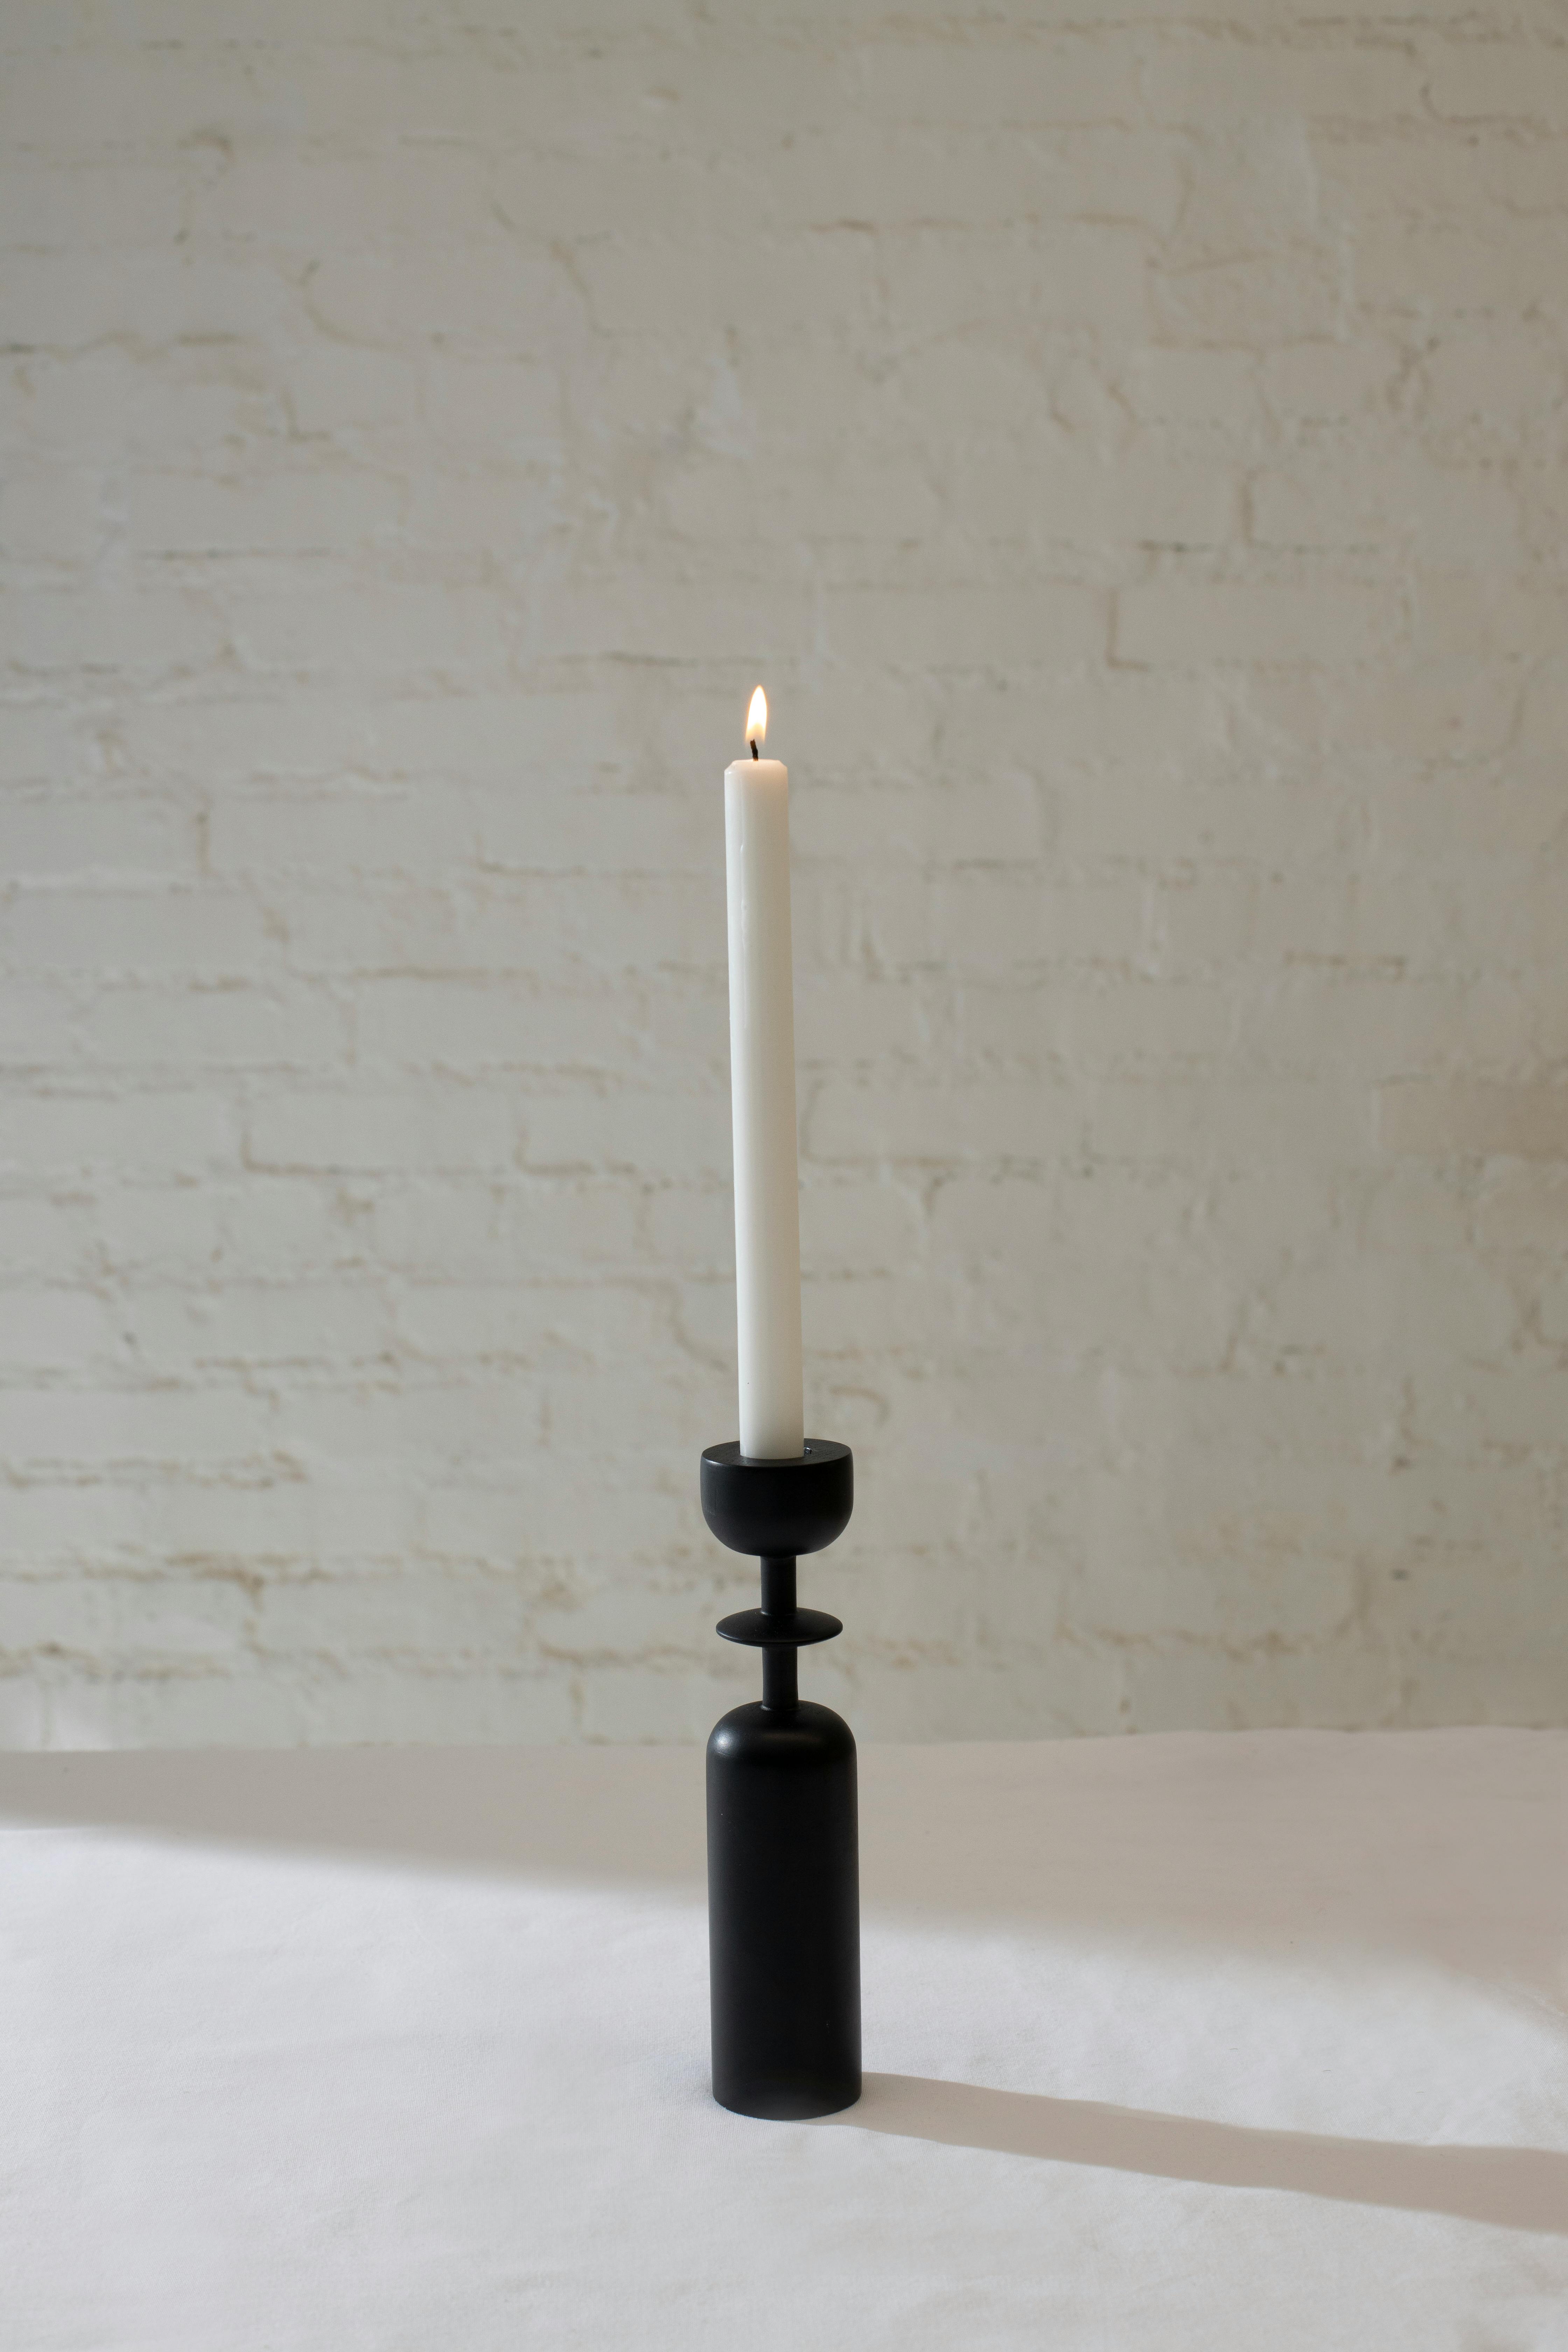 candle placed on white table